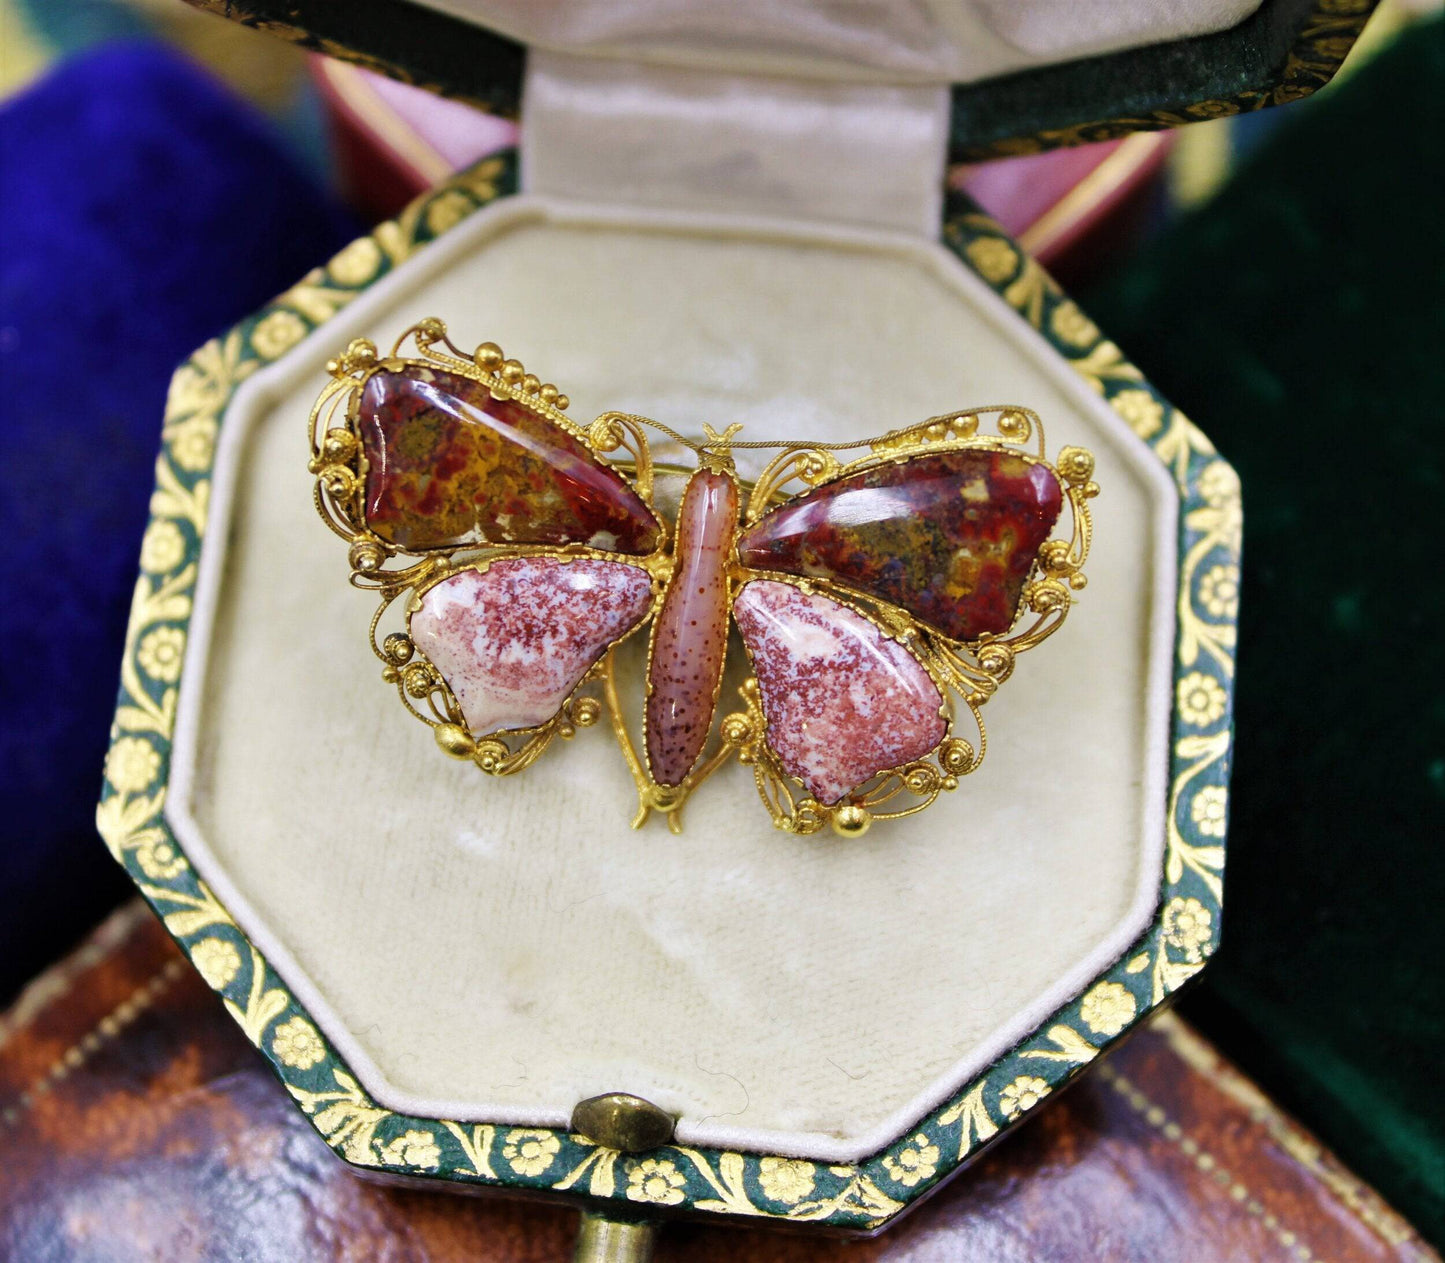 An extremely fine Georgian Agate Butterfly Brooch set in High Carat Yellow Gold, English, Circa 1780 - 1790 - Robin Haydock Antiques